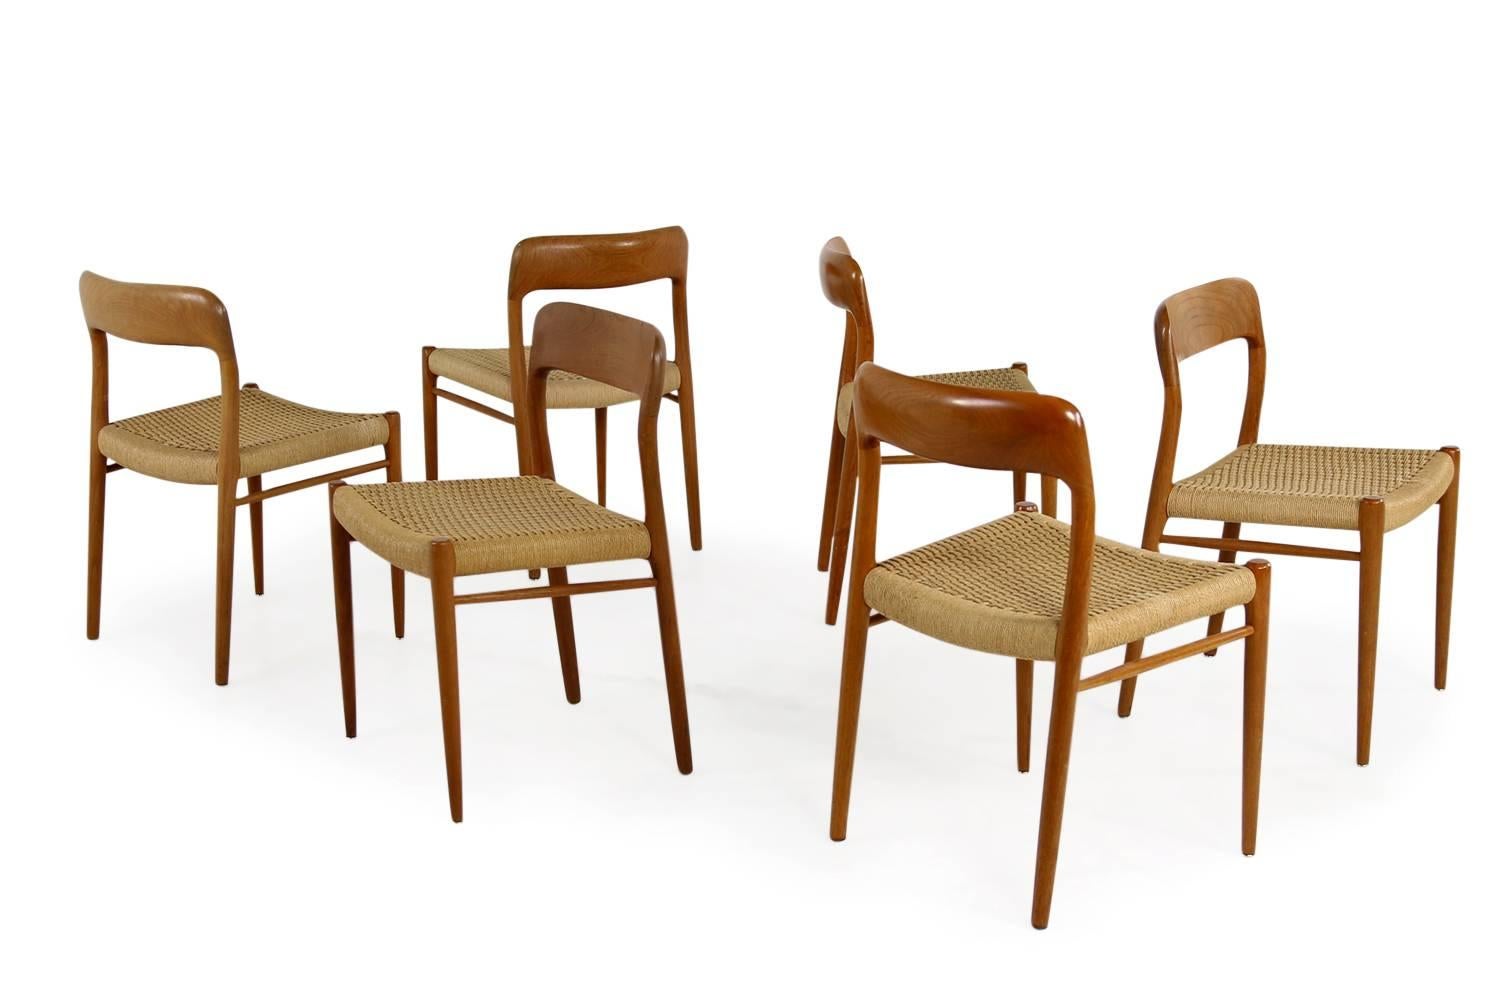 Six 1960s Danish Teak and Cane Dining Room Chairs by Niels O. Moller Mod. 75 1